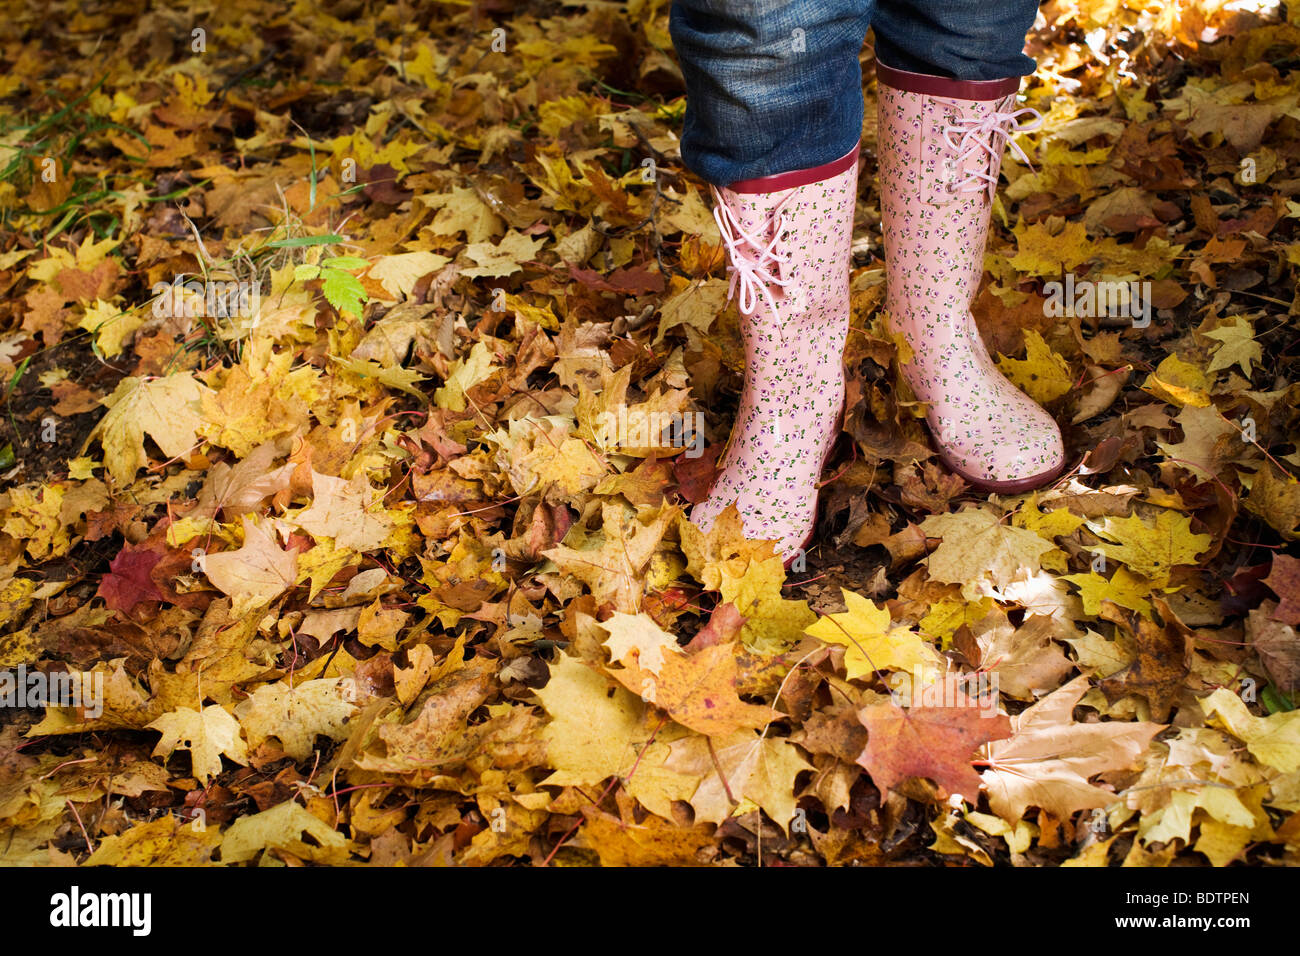 A woman wearing rubber boats in autumn forest Stock Photo